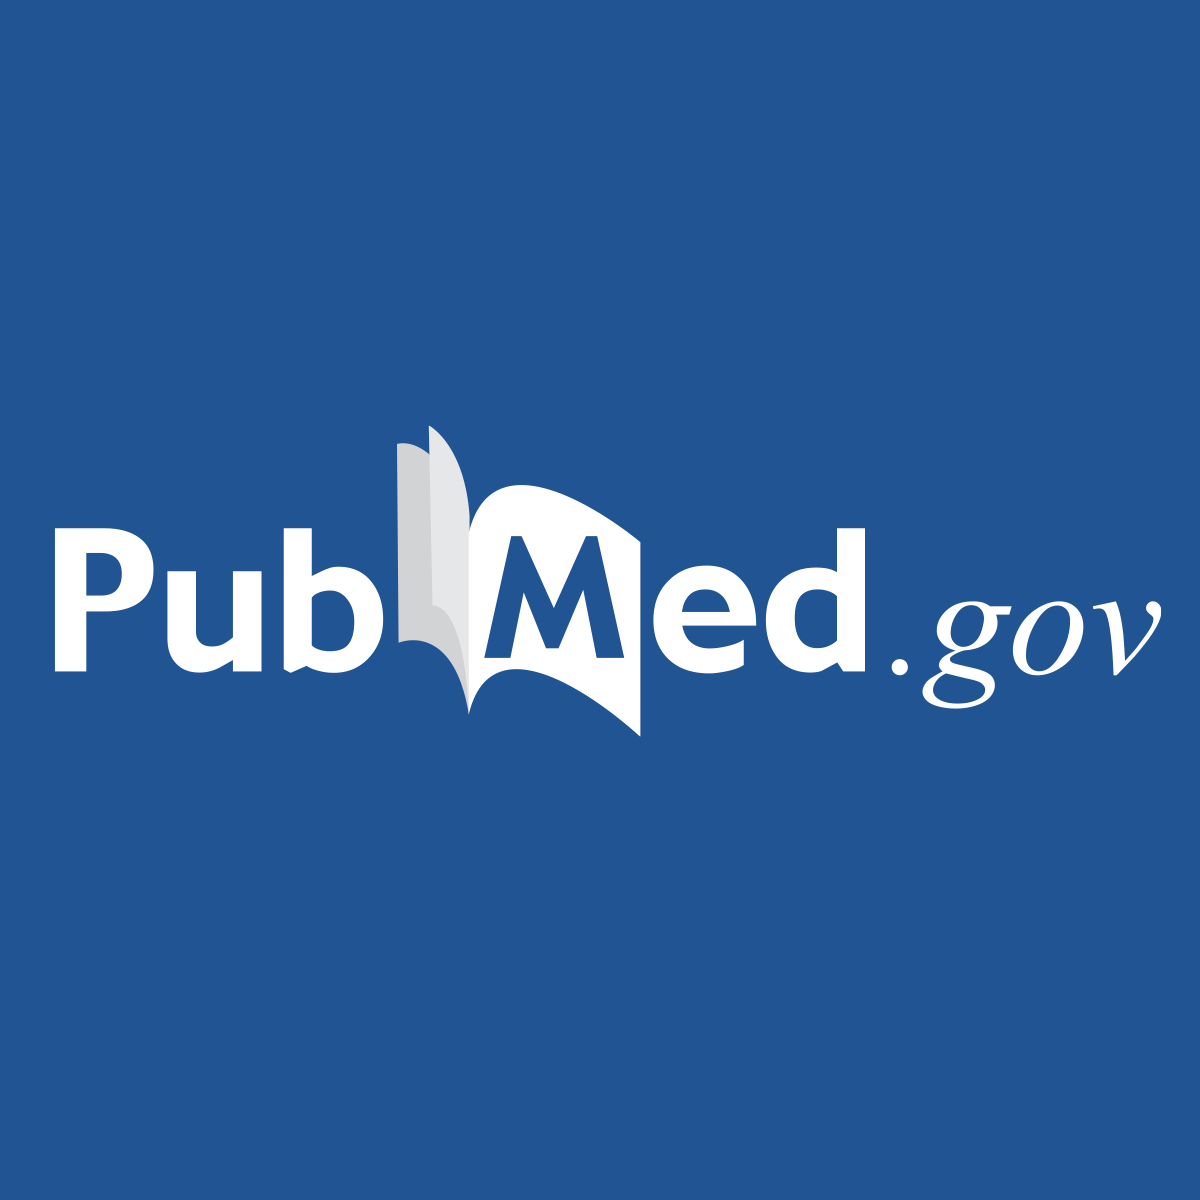 Randomized, Phase II Study of Trastuzumab Beyond Progression in Patients With HER2-Positive Advanced Gastric or Gastroesophageal Junction Cancer: WJOG7112G (T-ACT Study) - PubMed